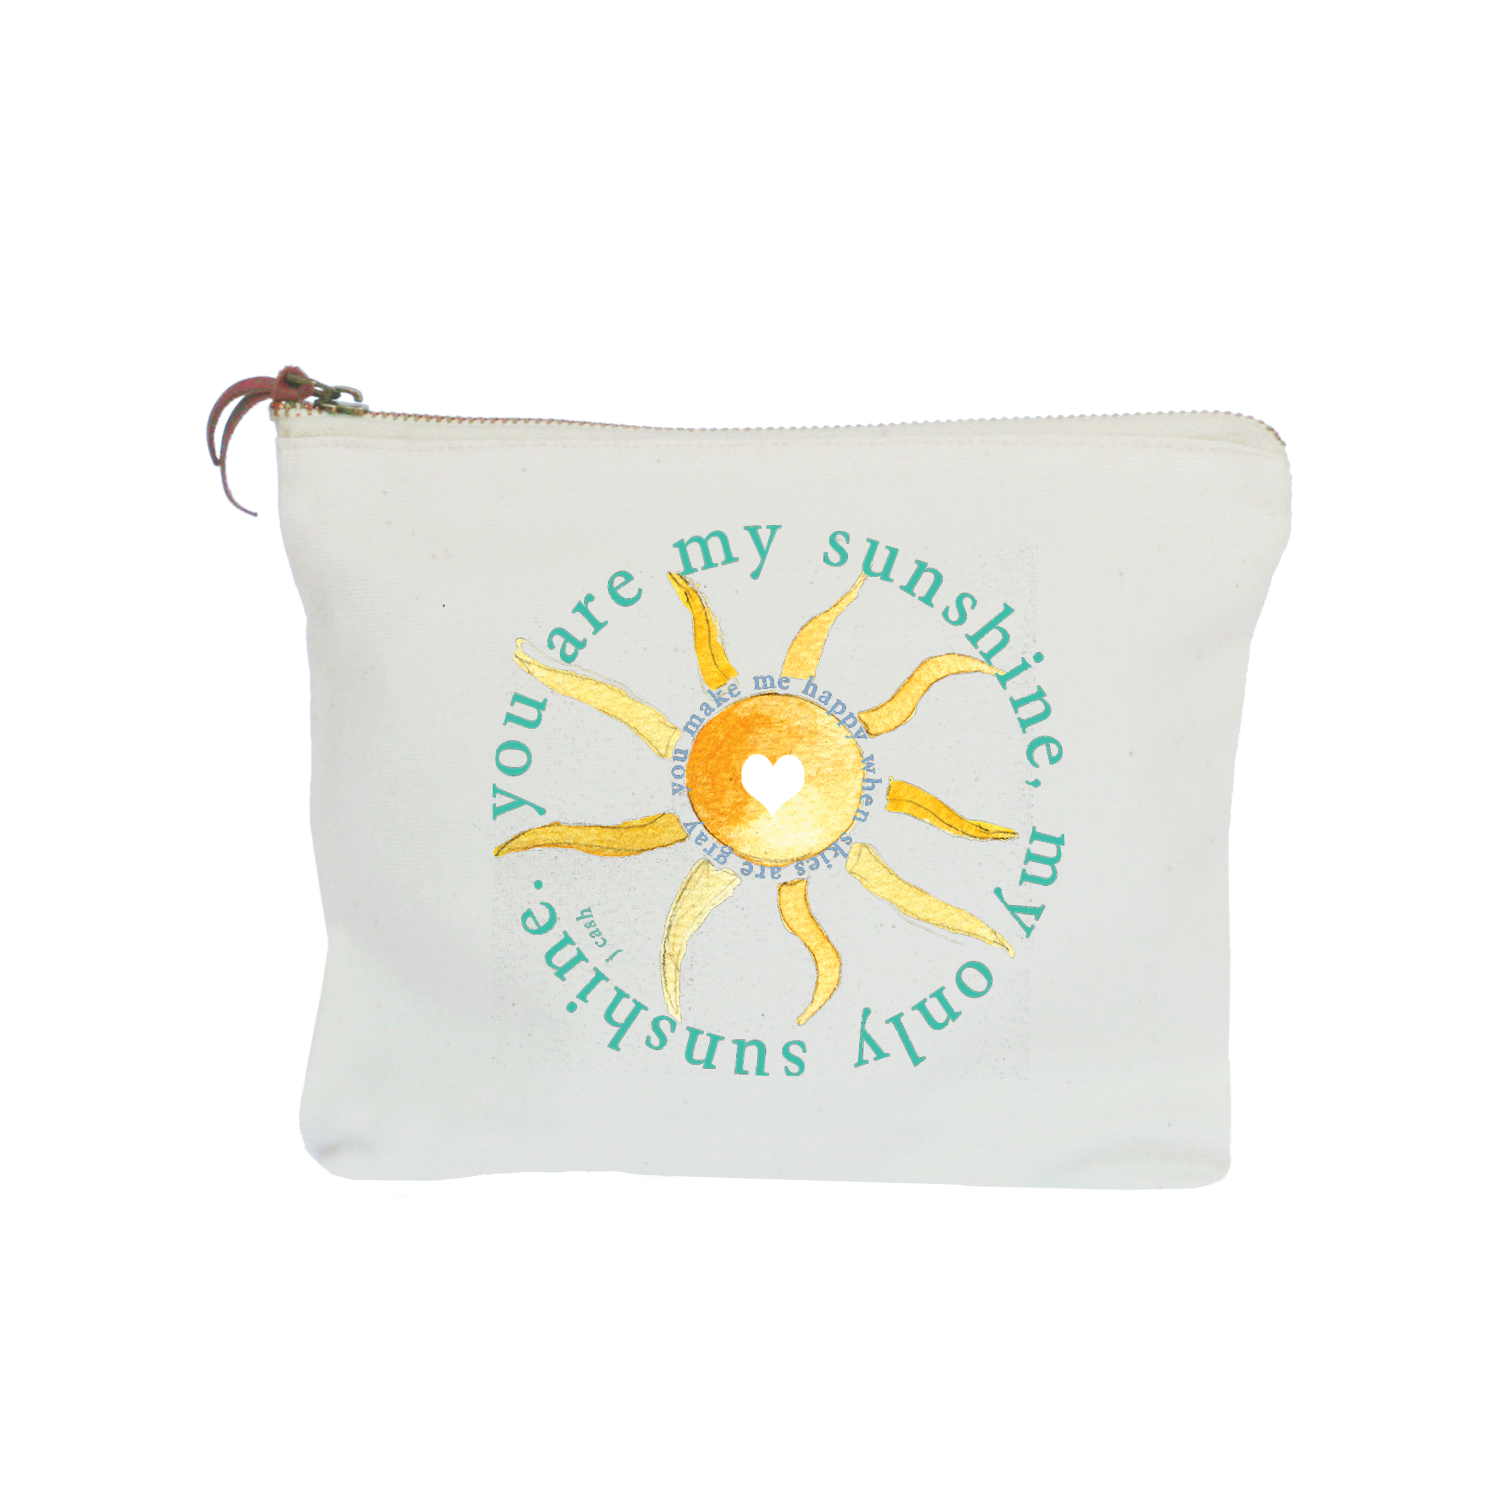 you are my sunshine zipper pouch